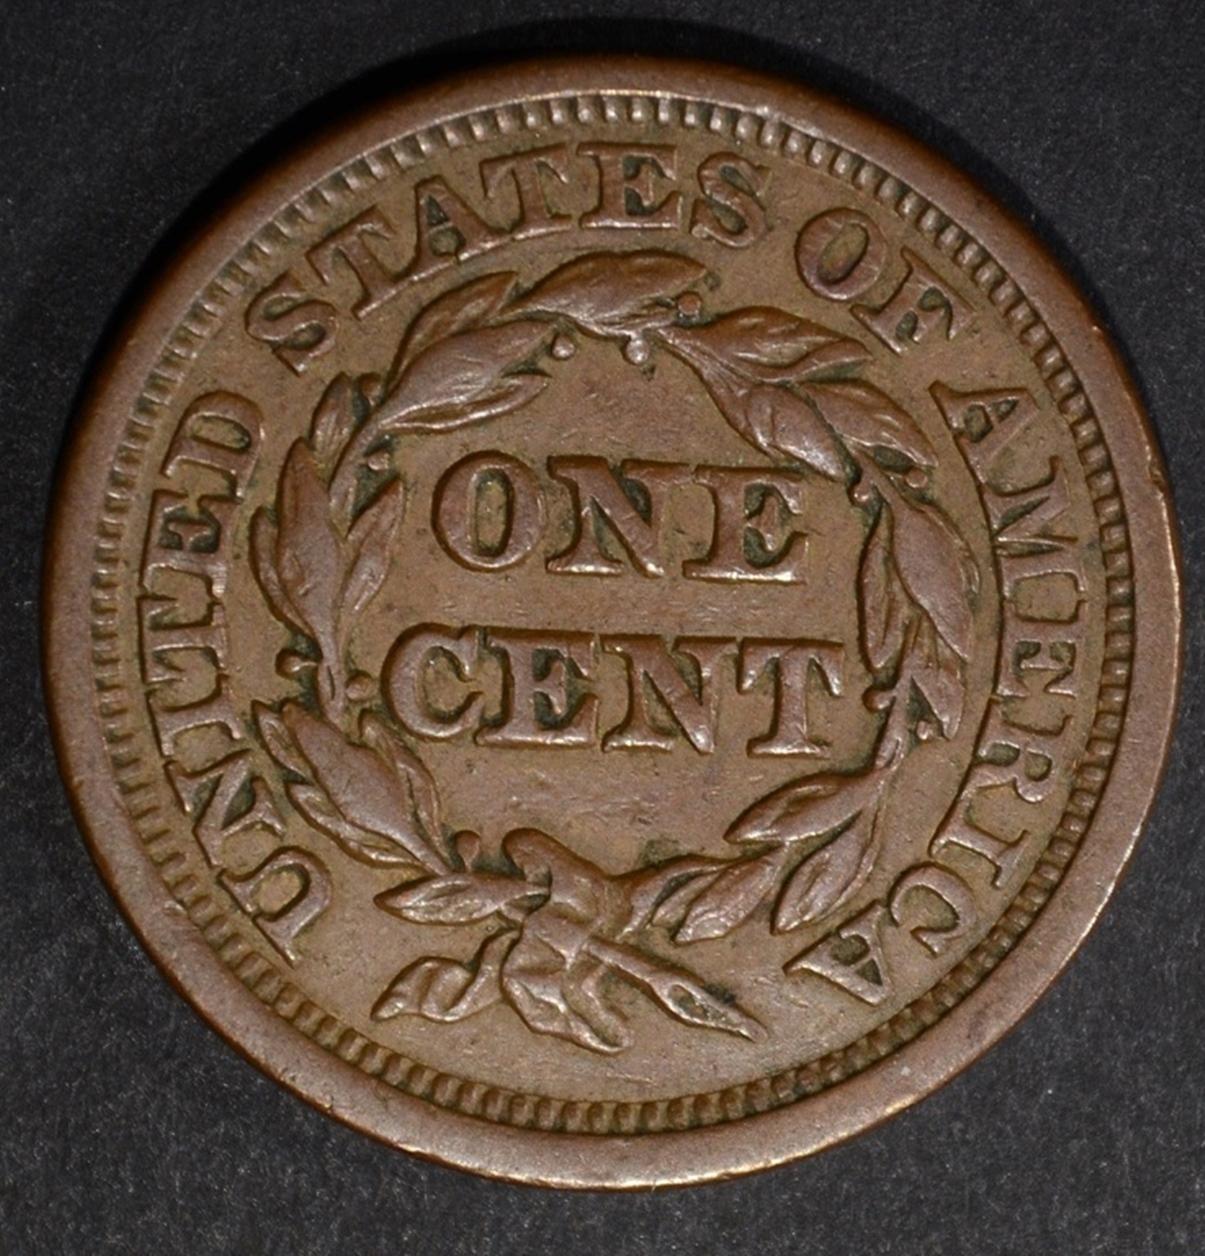 1845 LARGE CENT, XF